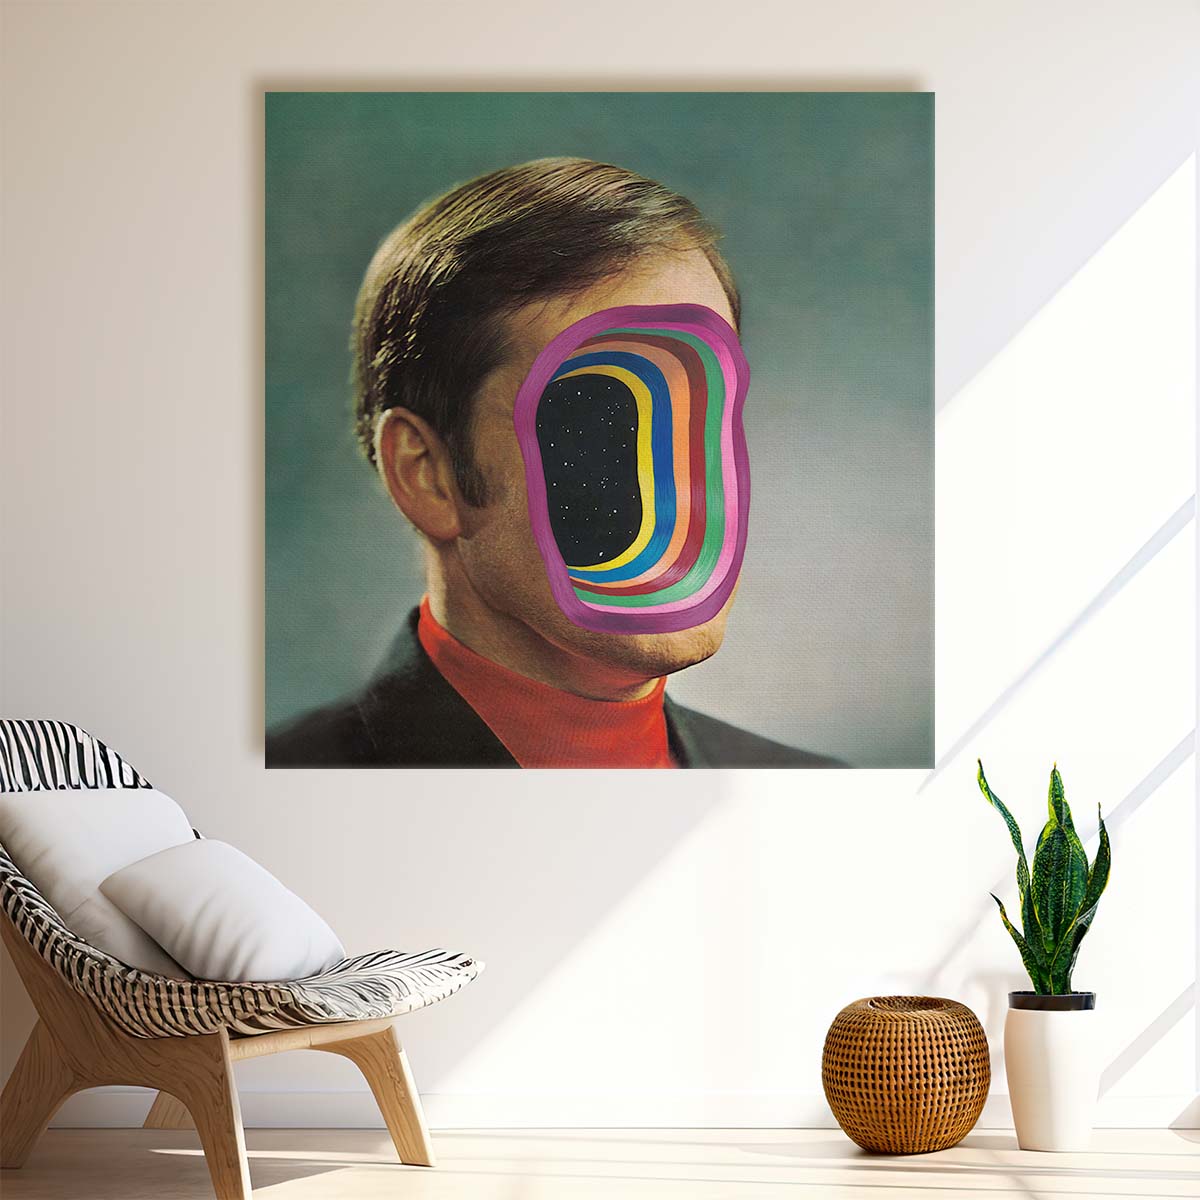 Retro Optical Illusion Illustration of a Colorful Universe Man Wall Art by Luxuriance Designs. Made in USA.